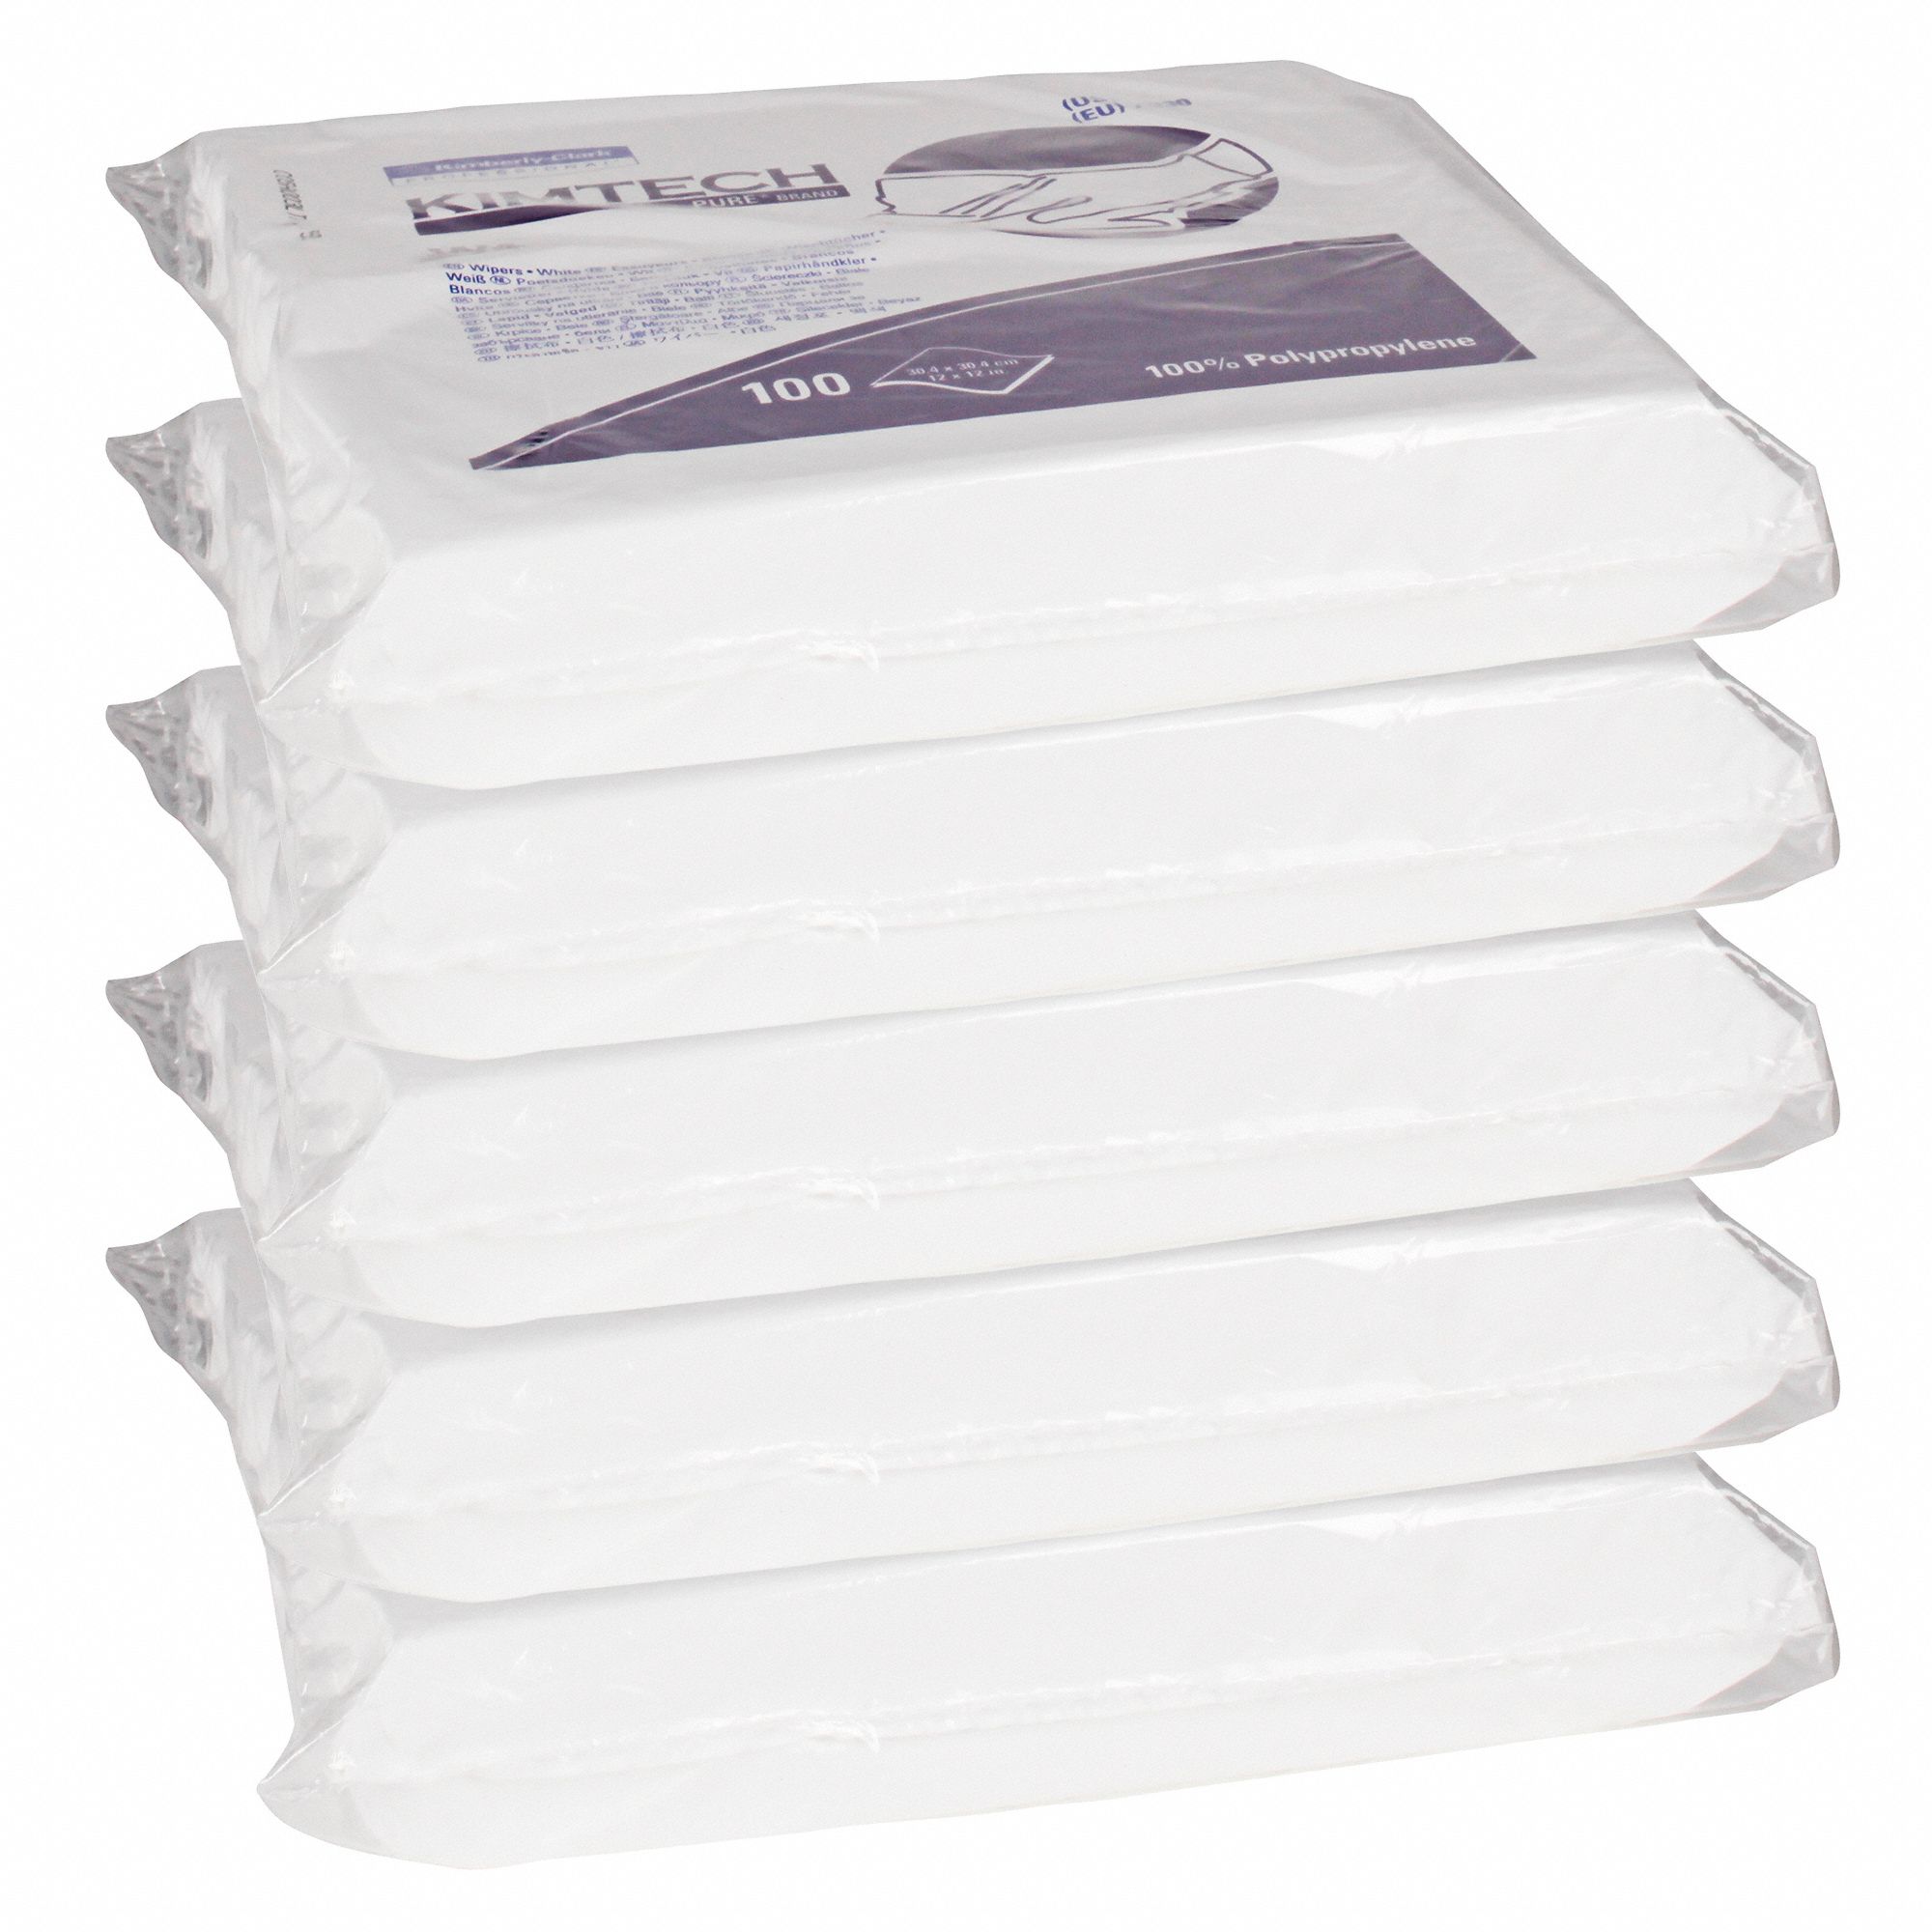 Details about   KIMTECH PURE W4 Disposable Cleanroom Wipe 9"x9" 33390 1 Pack 100 Wipes 